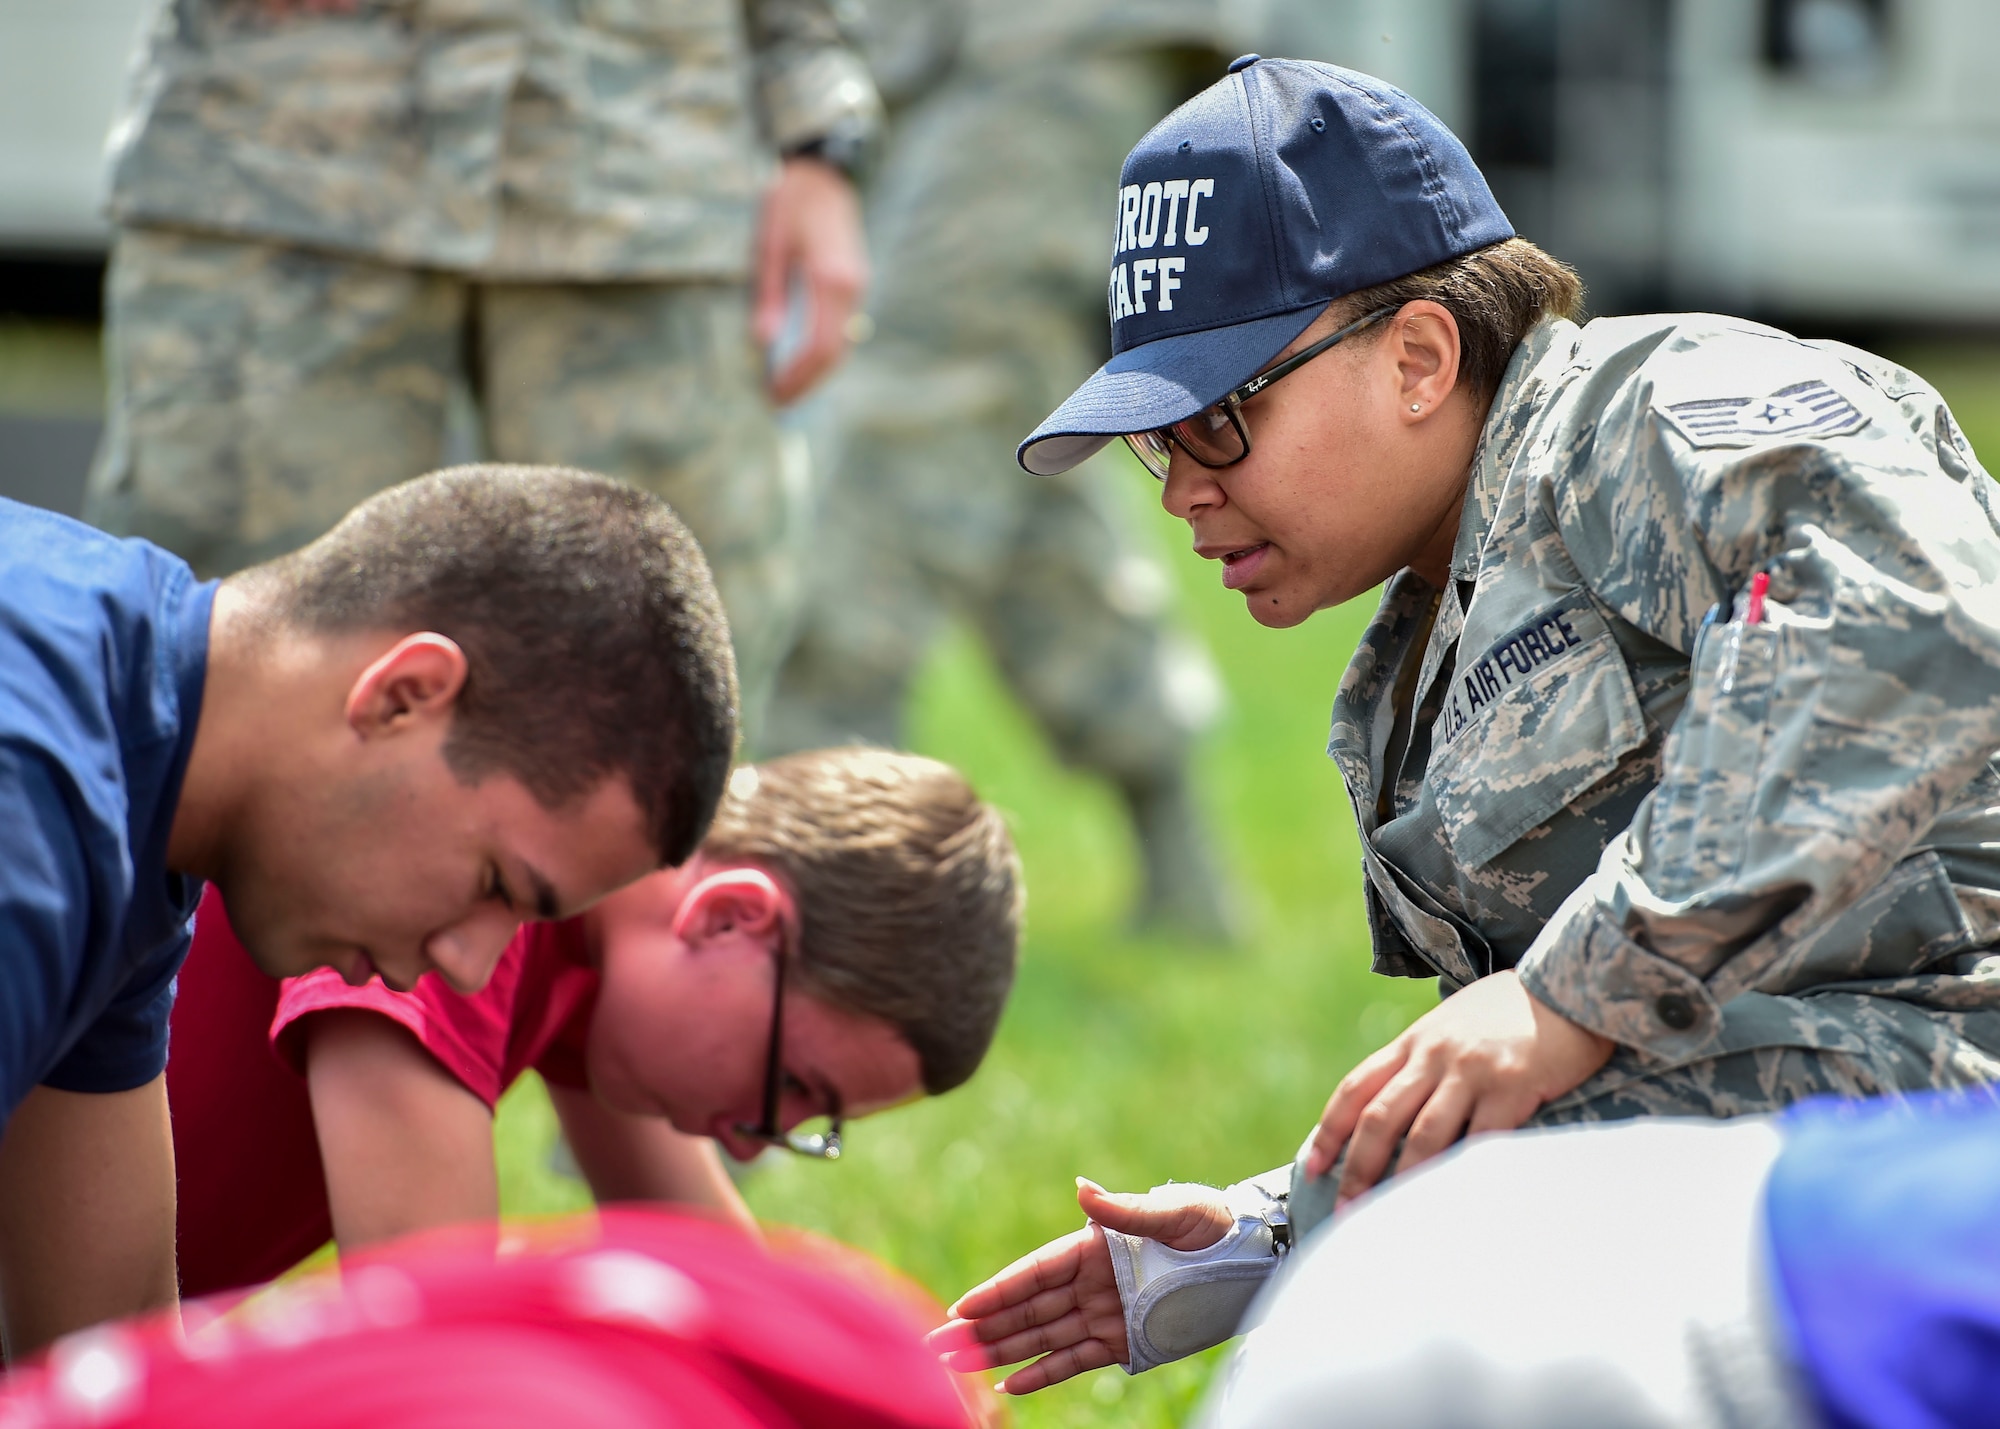 U.S. Air Force Reserve Tech. Sgt. Kristen Howard, a member of the 910th Medical Squadron, supervises Junior Reserve Officer Training Corps (JROTC) cadets doing physical training during an encampment here, June 21, 2017. The encampment, facilitated by 910th Airlift Wing Airmen, provided a five-day experience teaching military skills and replicating aspects of Basic Military Training. JROTC is a program sponsored by the Armed Forces for high school students across the country. (U.S. Air Force photo/Eric White)